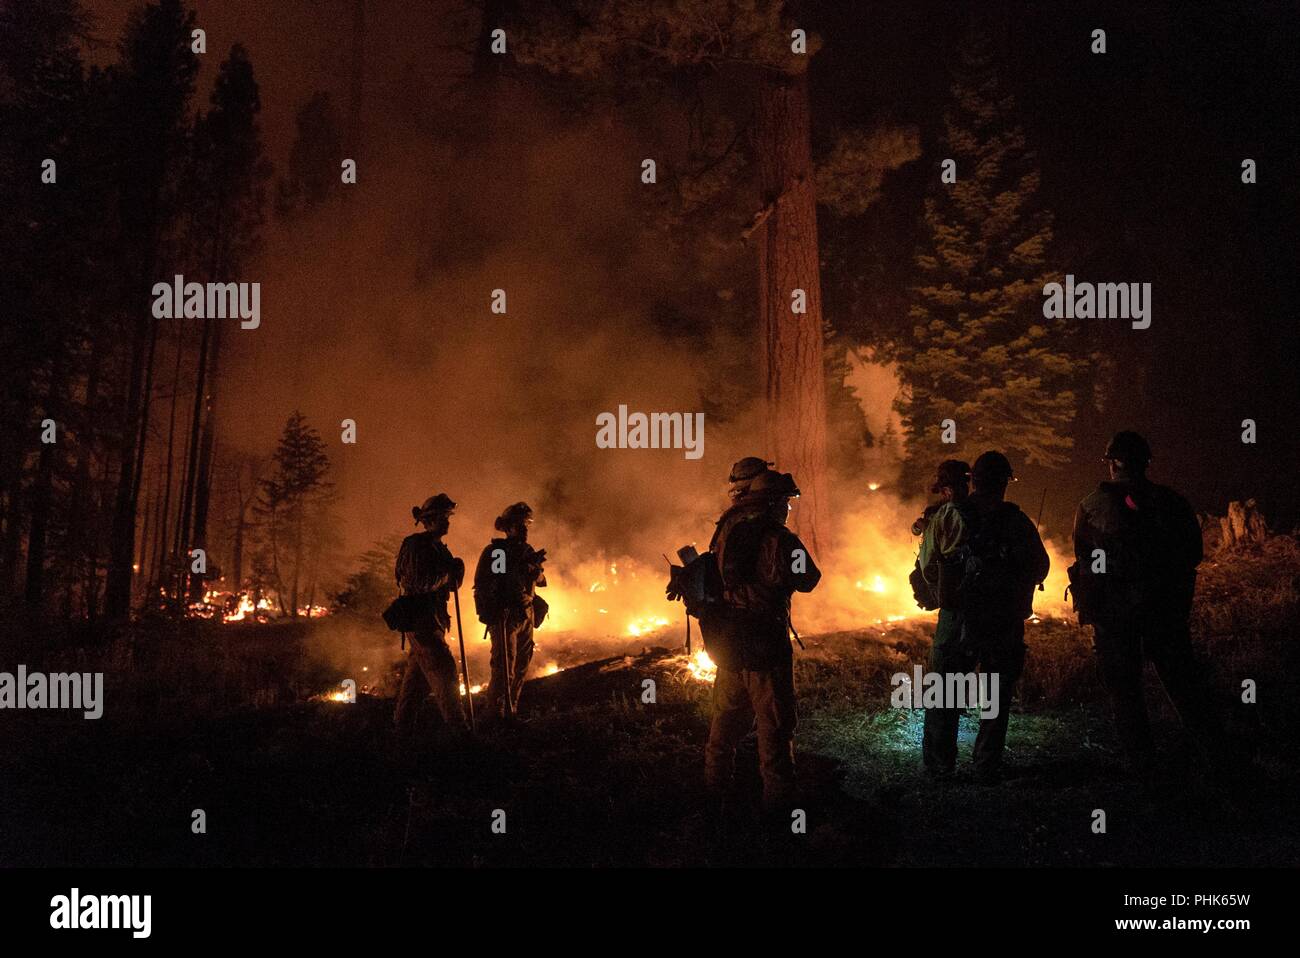 Cal State firefighters, work during a night operation to push back a fireline at the Donnell Fire in Stanislaus National Forest August 13, 2018 near Sonora, California. The wildfire burned 36,335 acres and destroyed 54 major structures across Northern California. Stock Photo